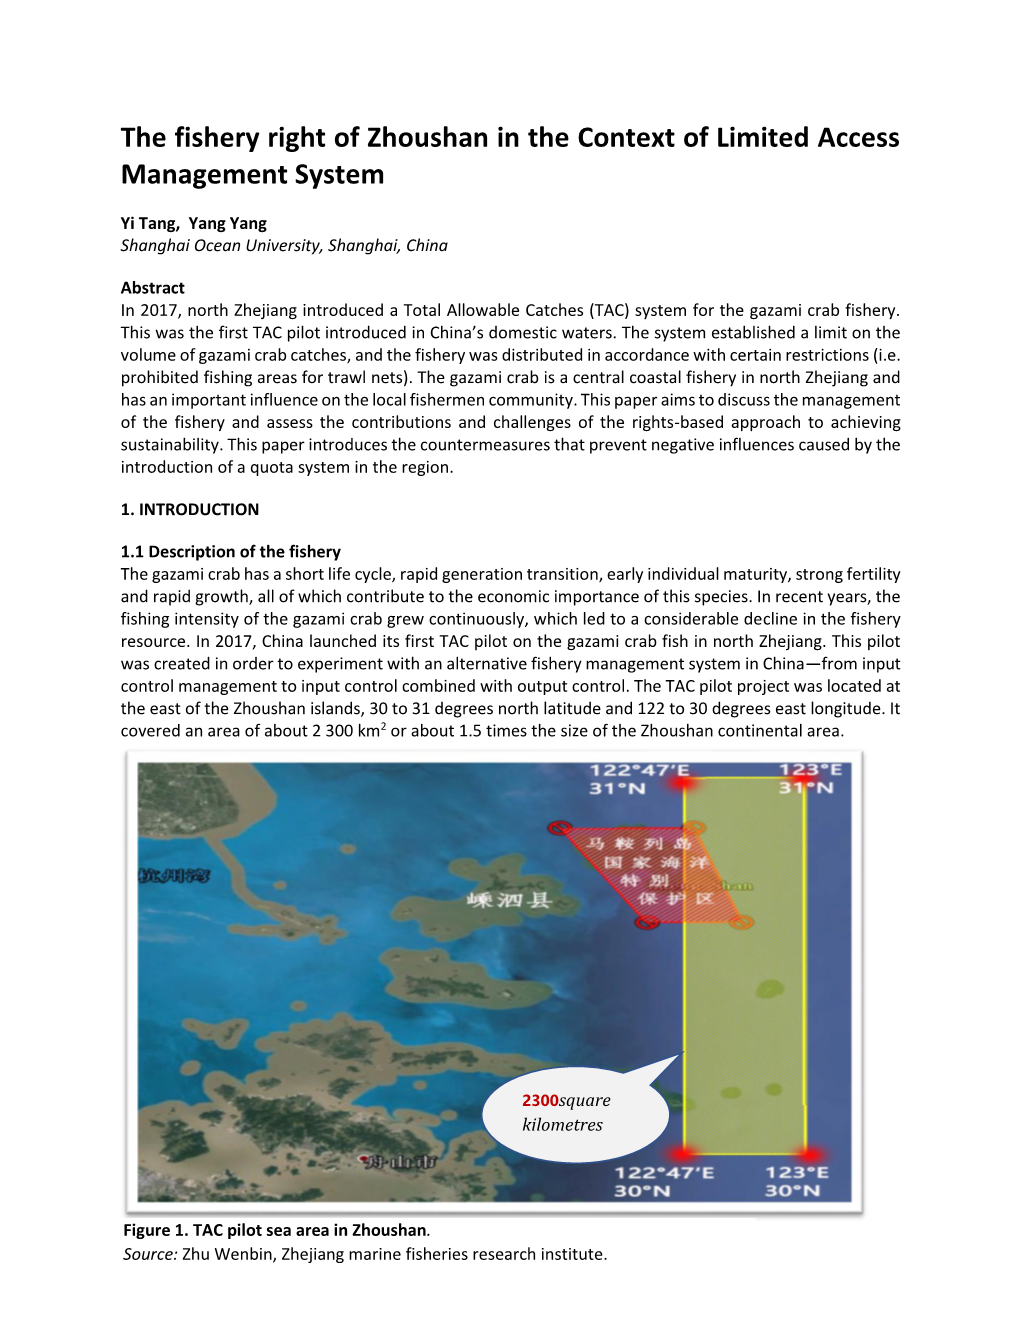 The Fishery Right of Zhoushan in the Context of Limited Access Management System